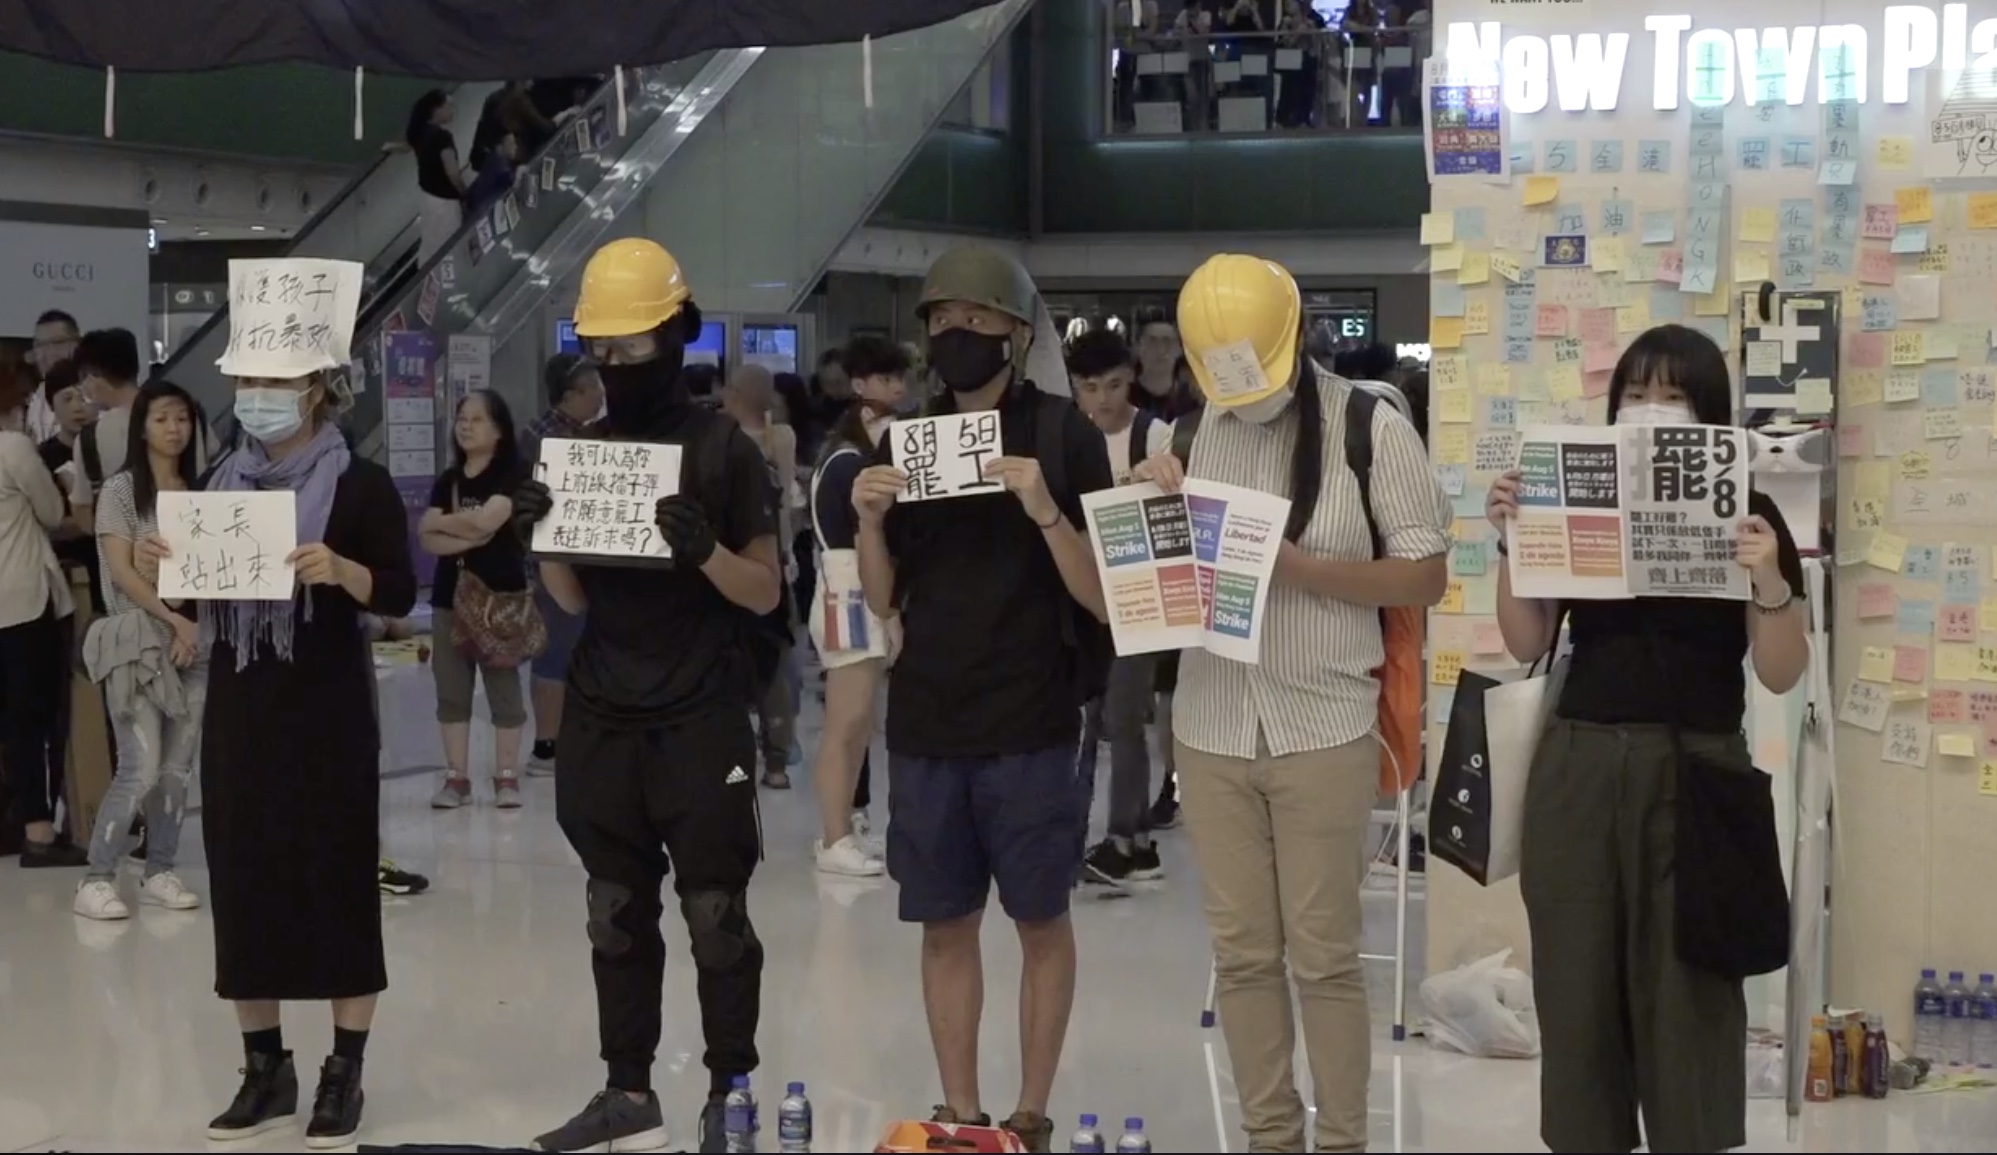 Protesters at New Town Plaza in Sha Tin last night hold up signs calling on Hongkongers to support a citywide strike on Monday. Screengrab via Facebook/Stand News.